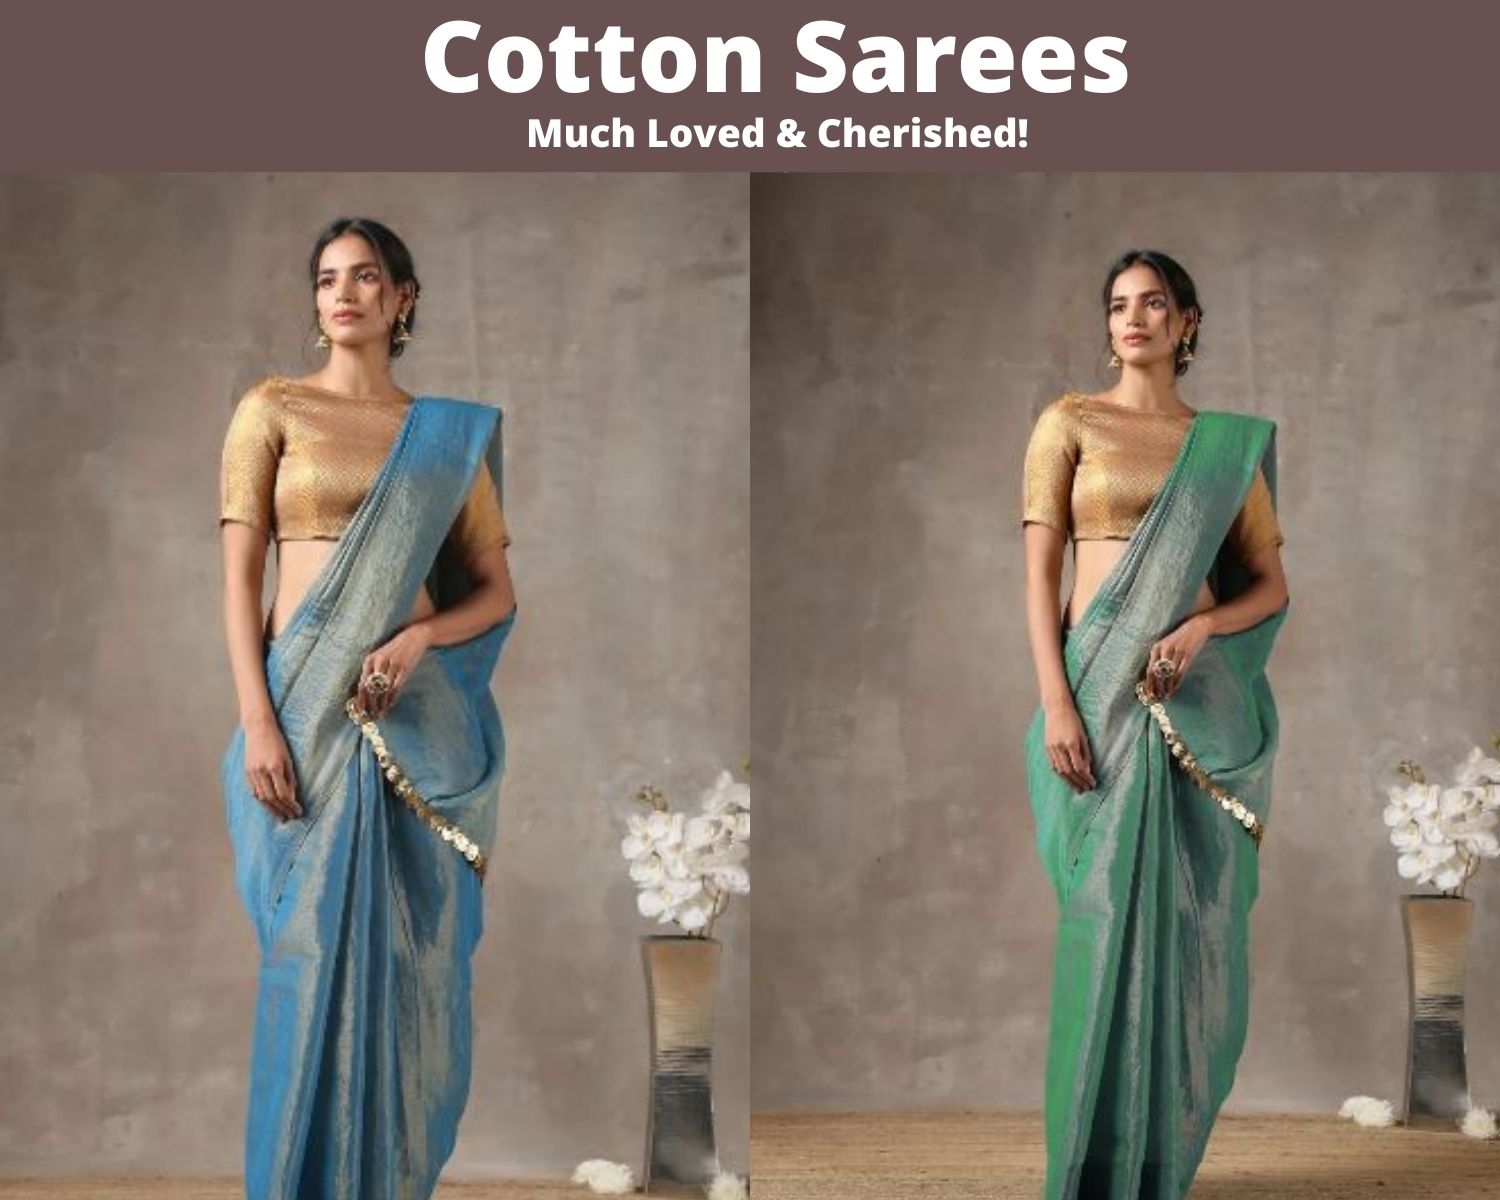 Cotton Sarees – Much Loved & Cherished!